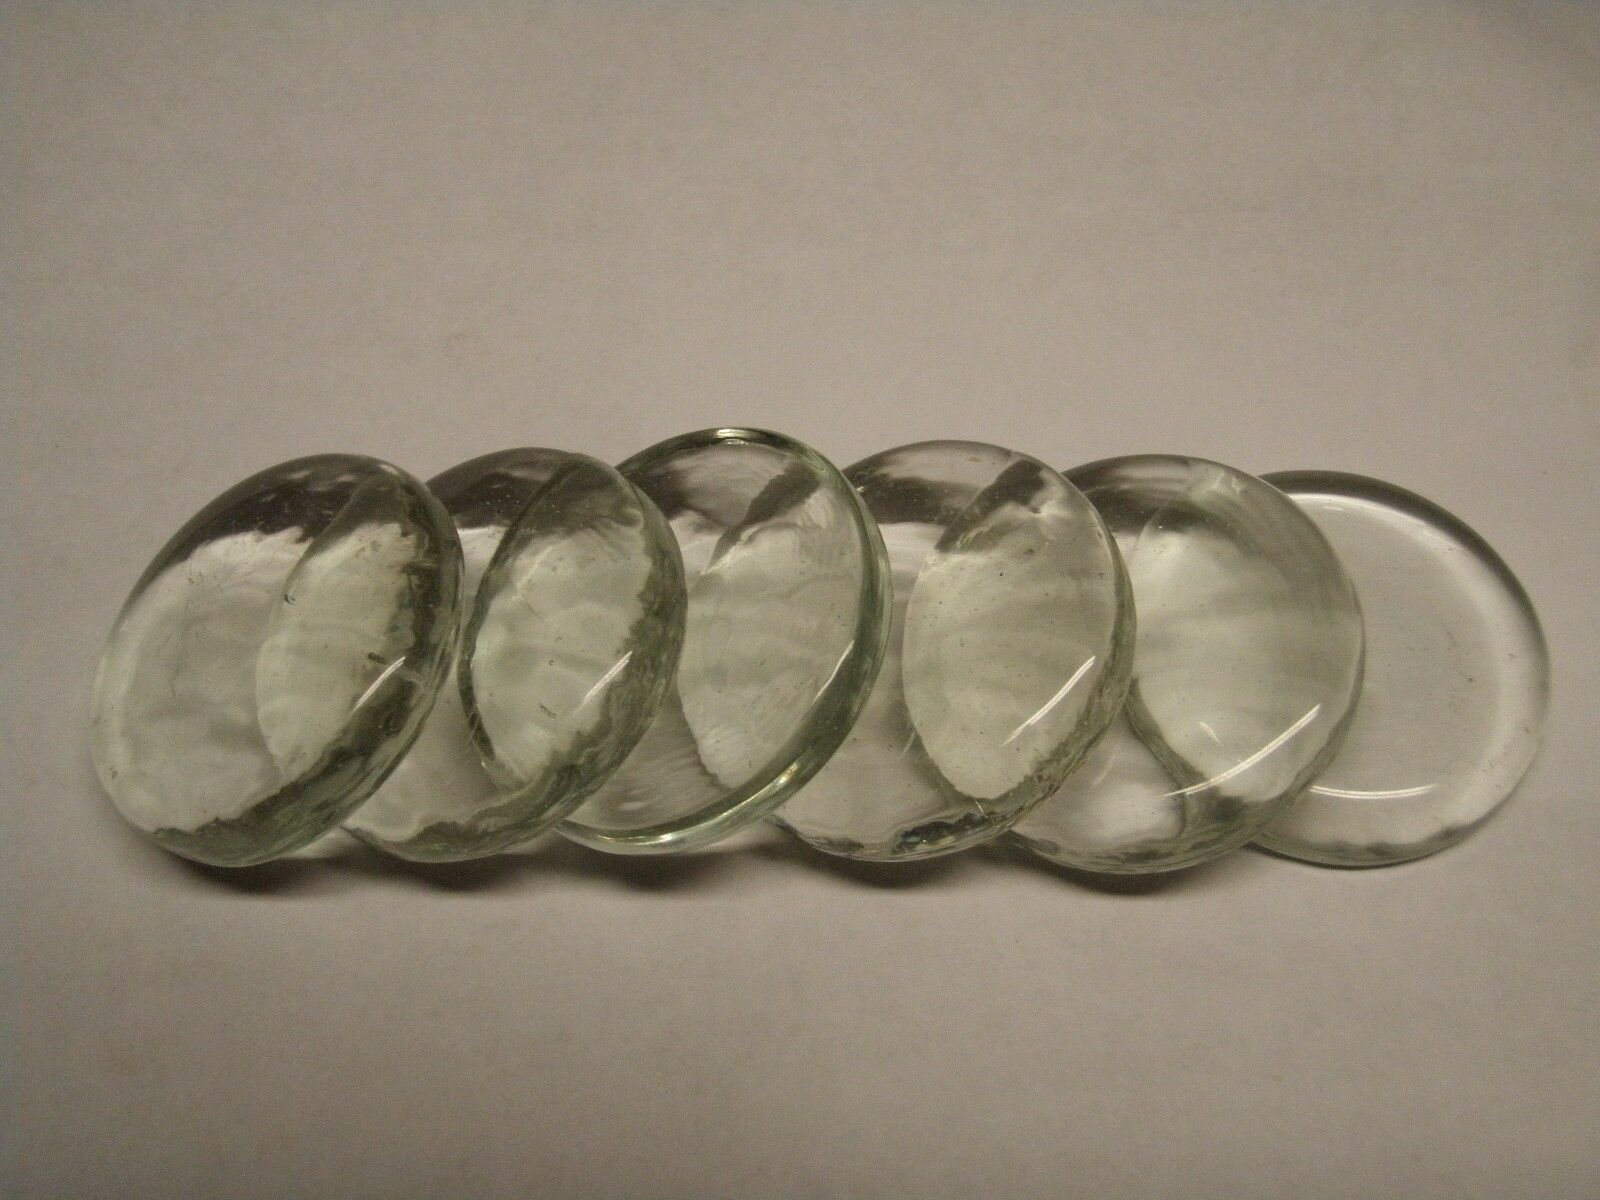 7 Glass Fermentation Weights For Wide Mouth Jars- The Original- Now 17 % Thicker